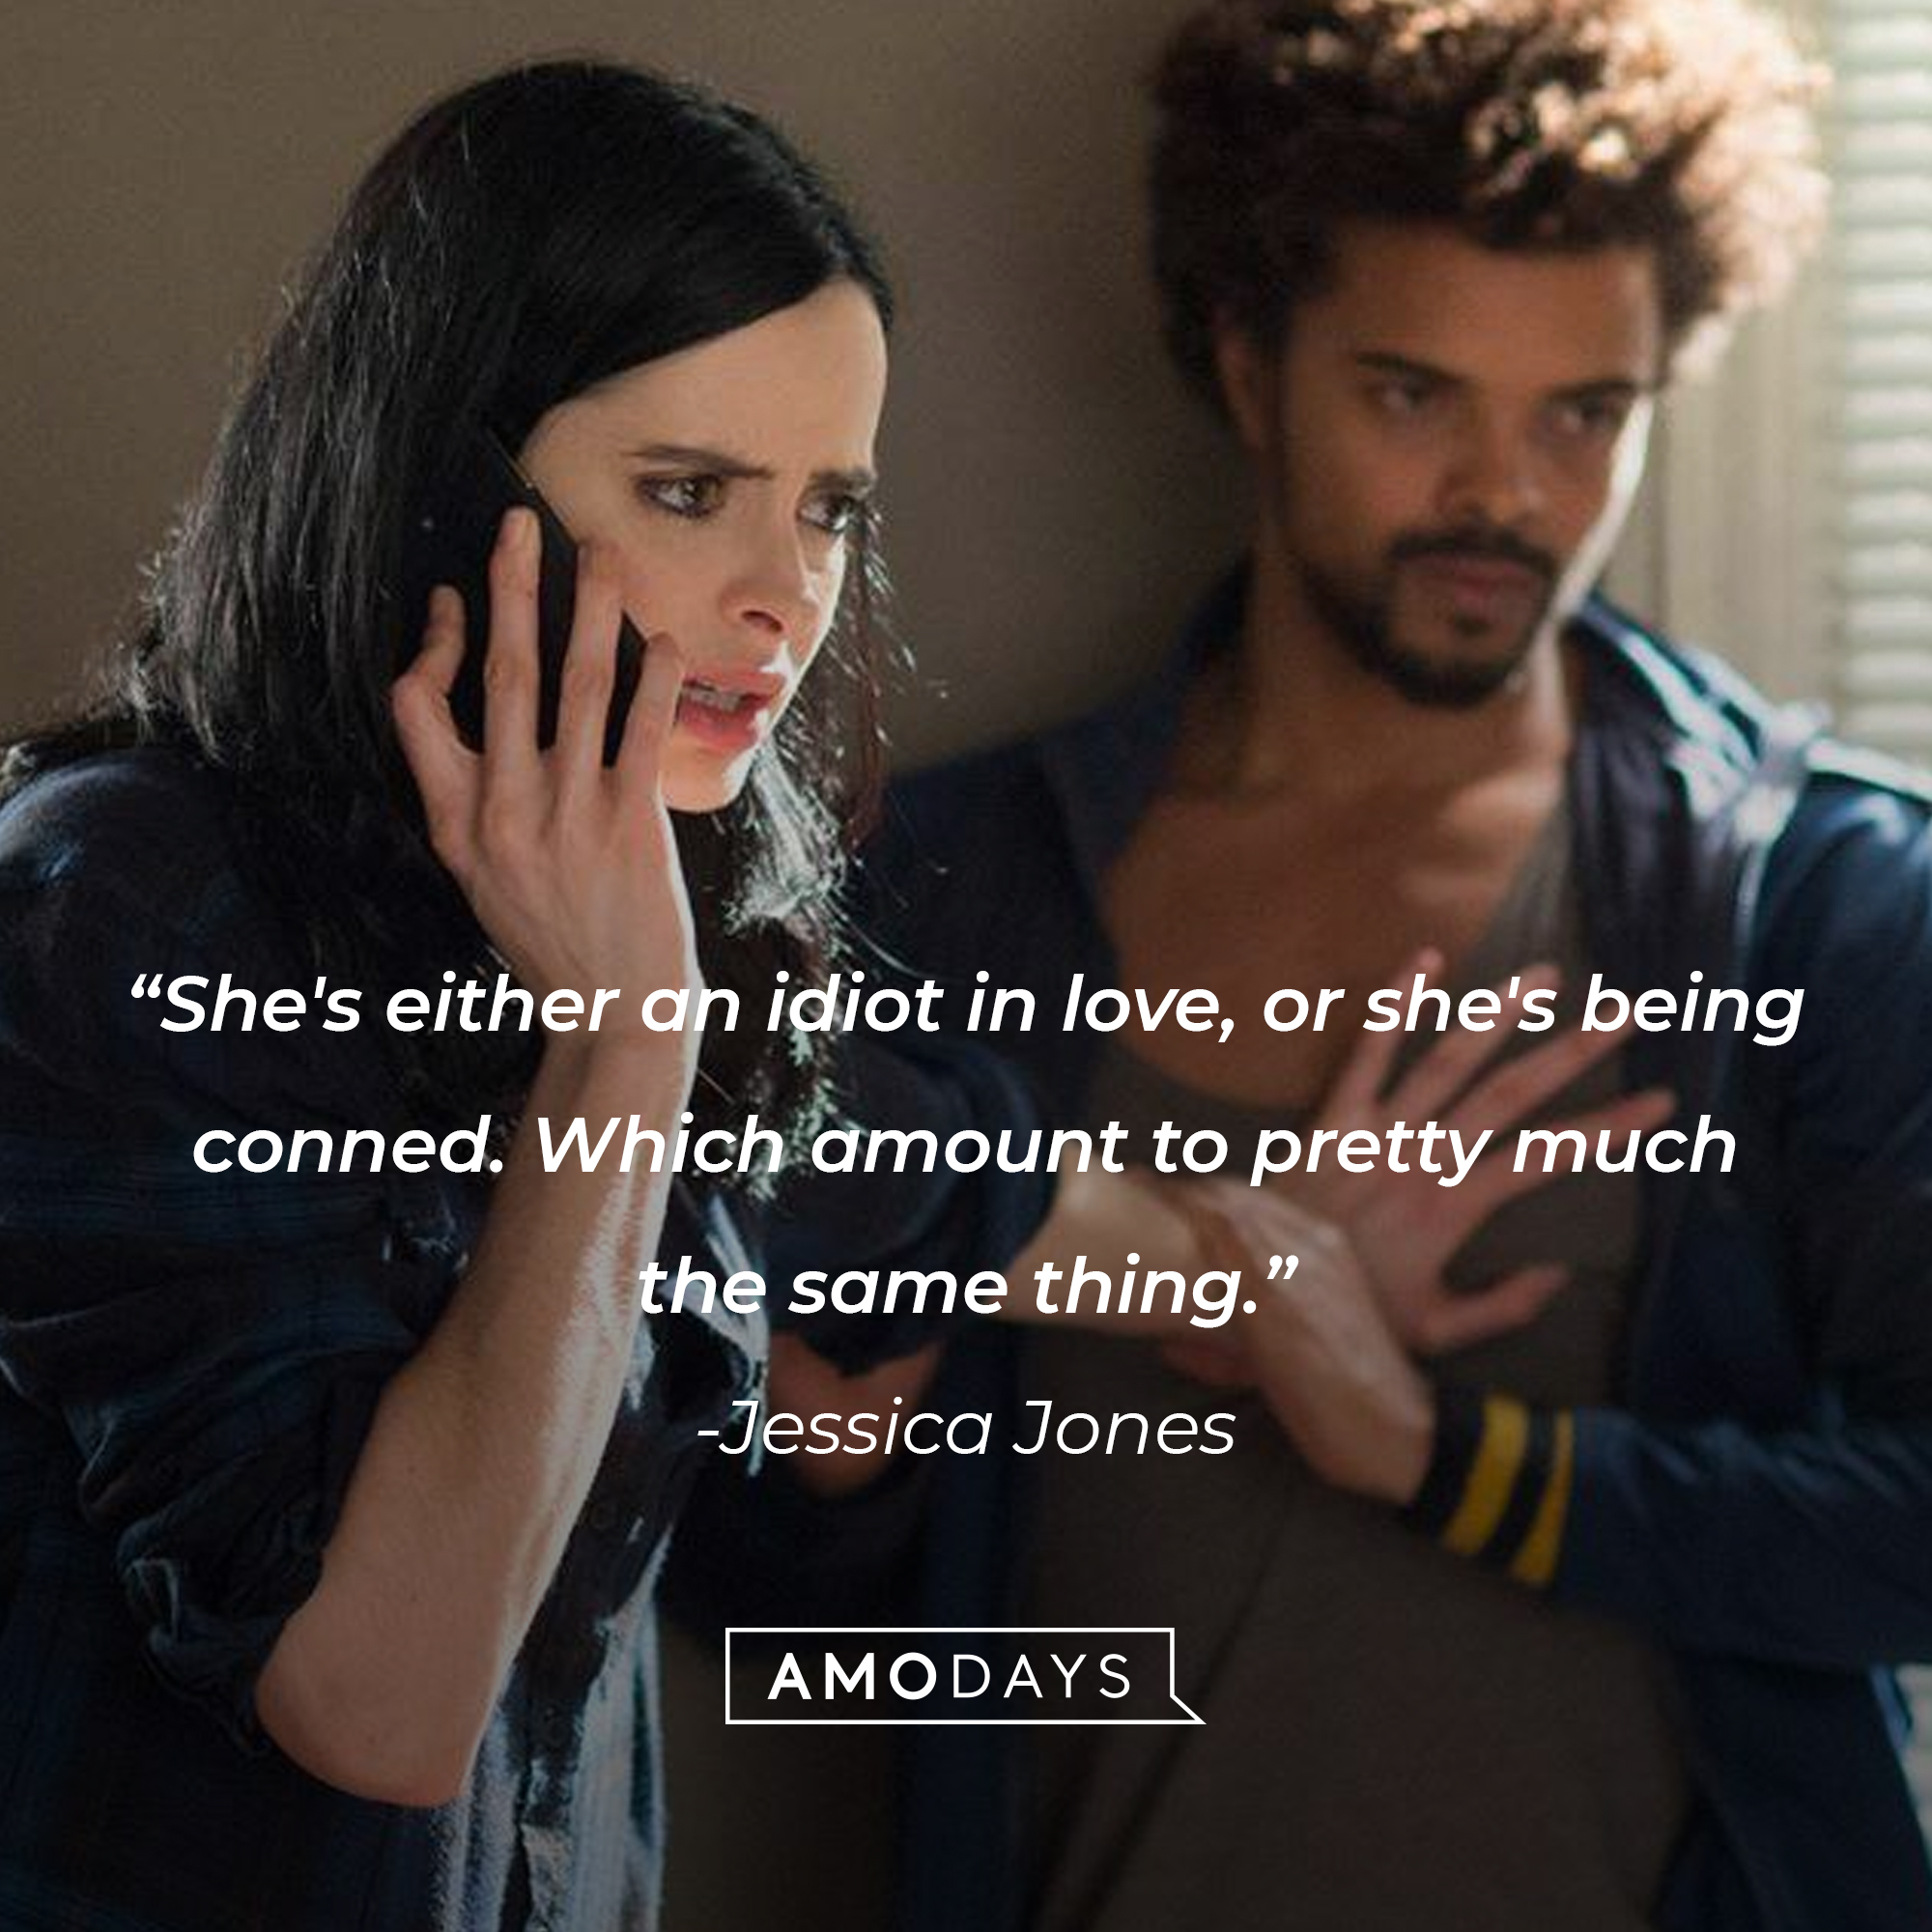 An image of Jessica Jones with another character in the series, “Marvel's Jessica Jones,” with her quote:  “She's either an idiot in love, or she's being conned. Which amount to pretty much the same thing."┃Source:facebook.com/JessicaJonesLat